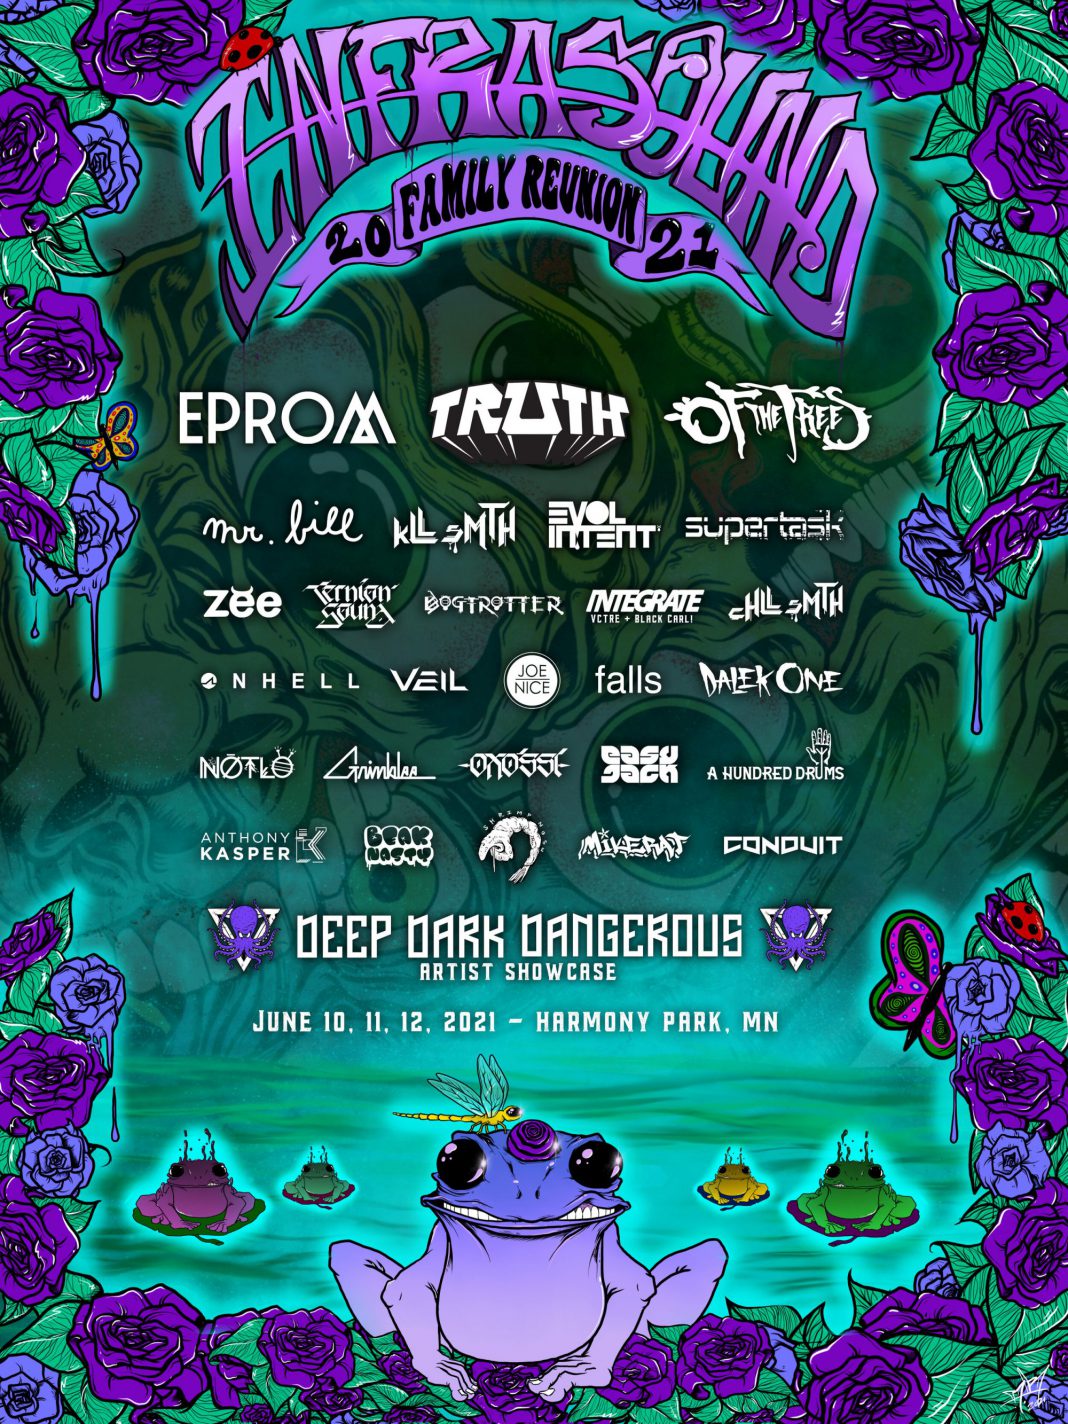 Infrasound Family Reunion Announces Dates and a Fire Lineup EDM Identity